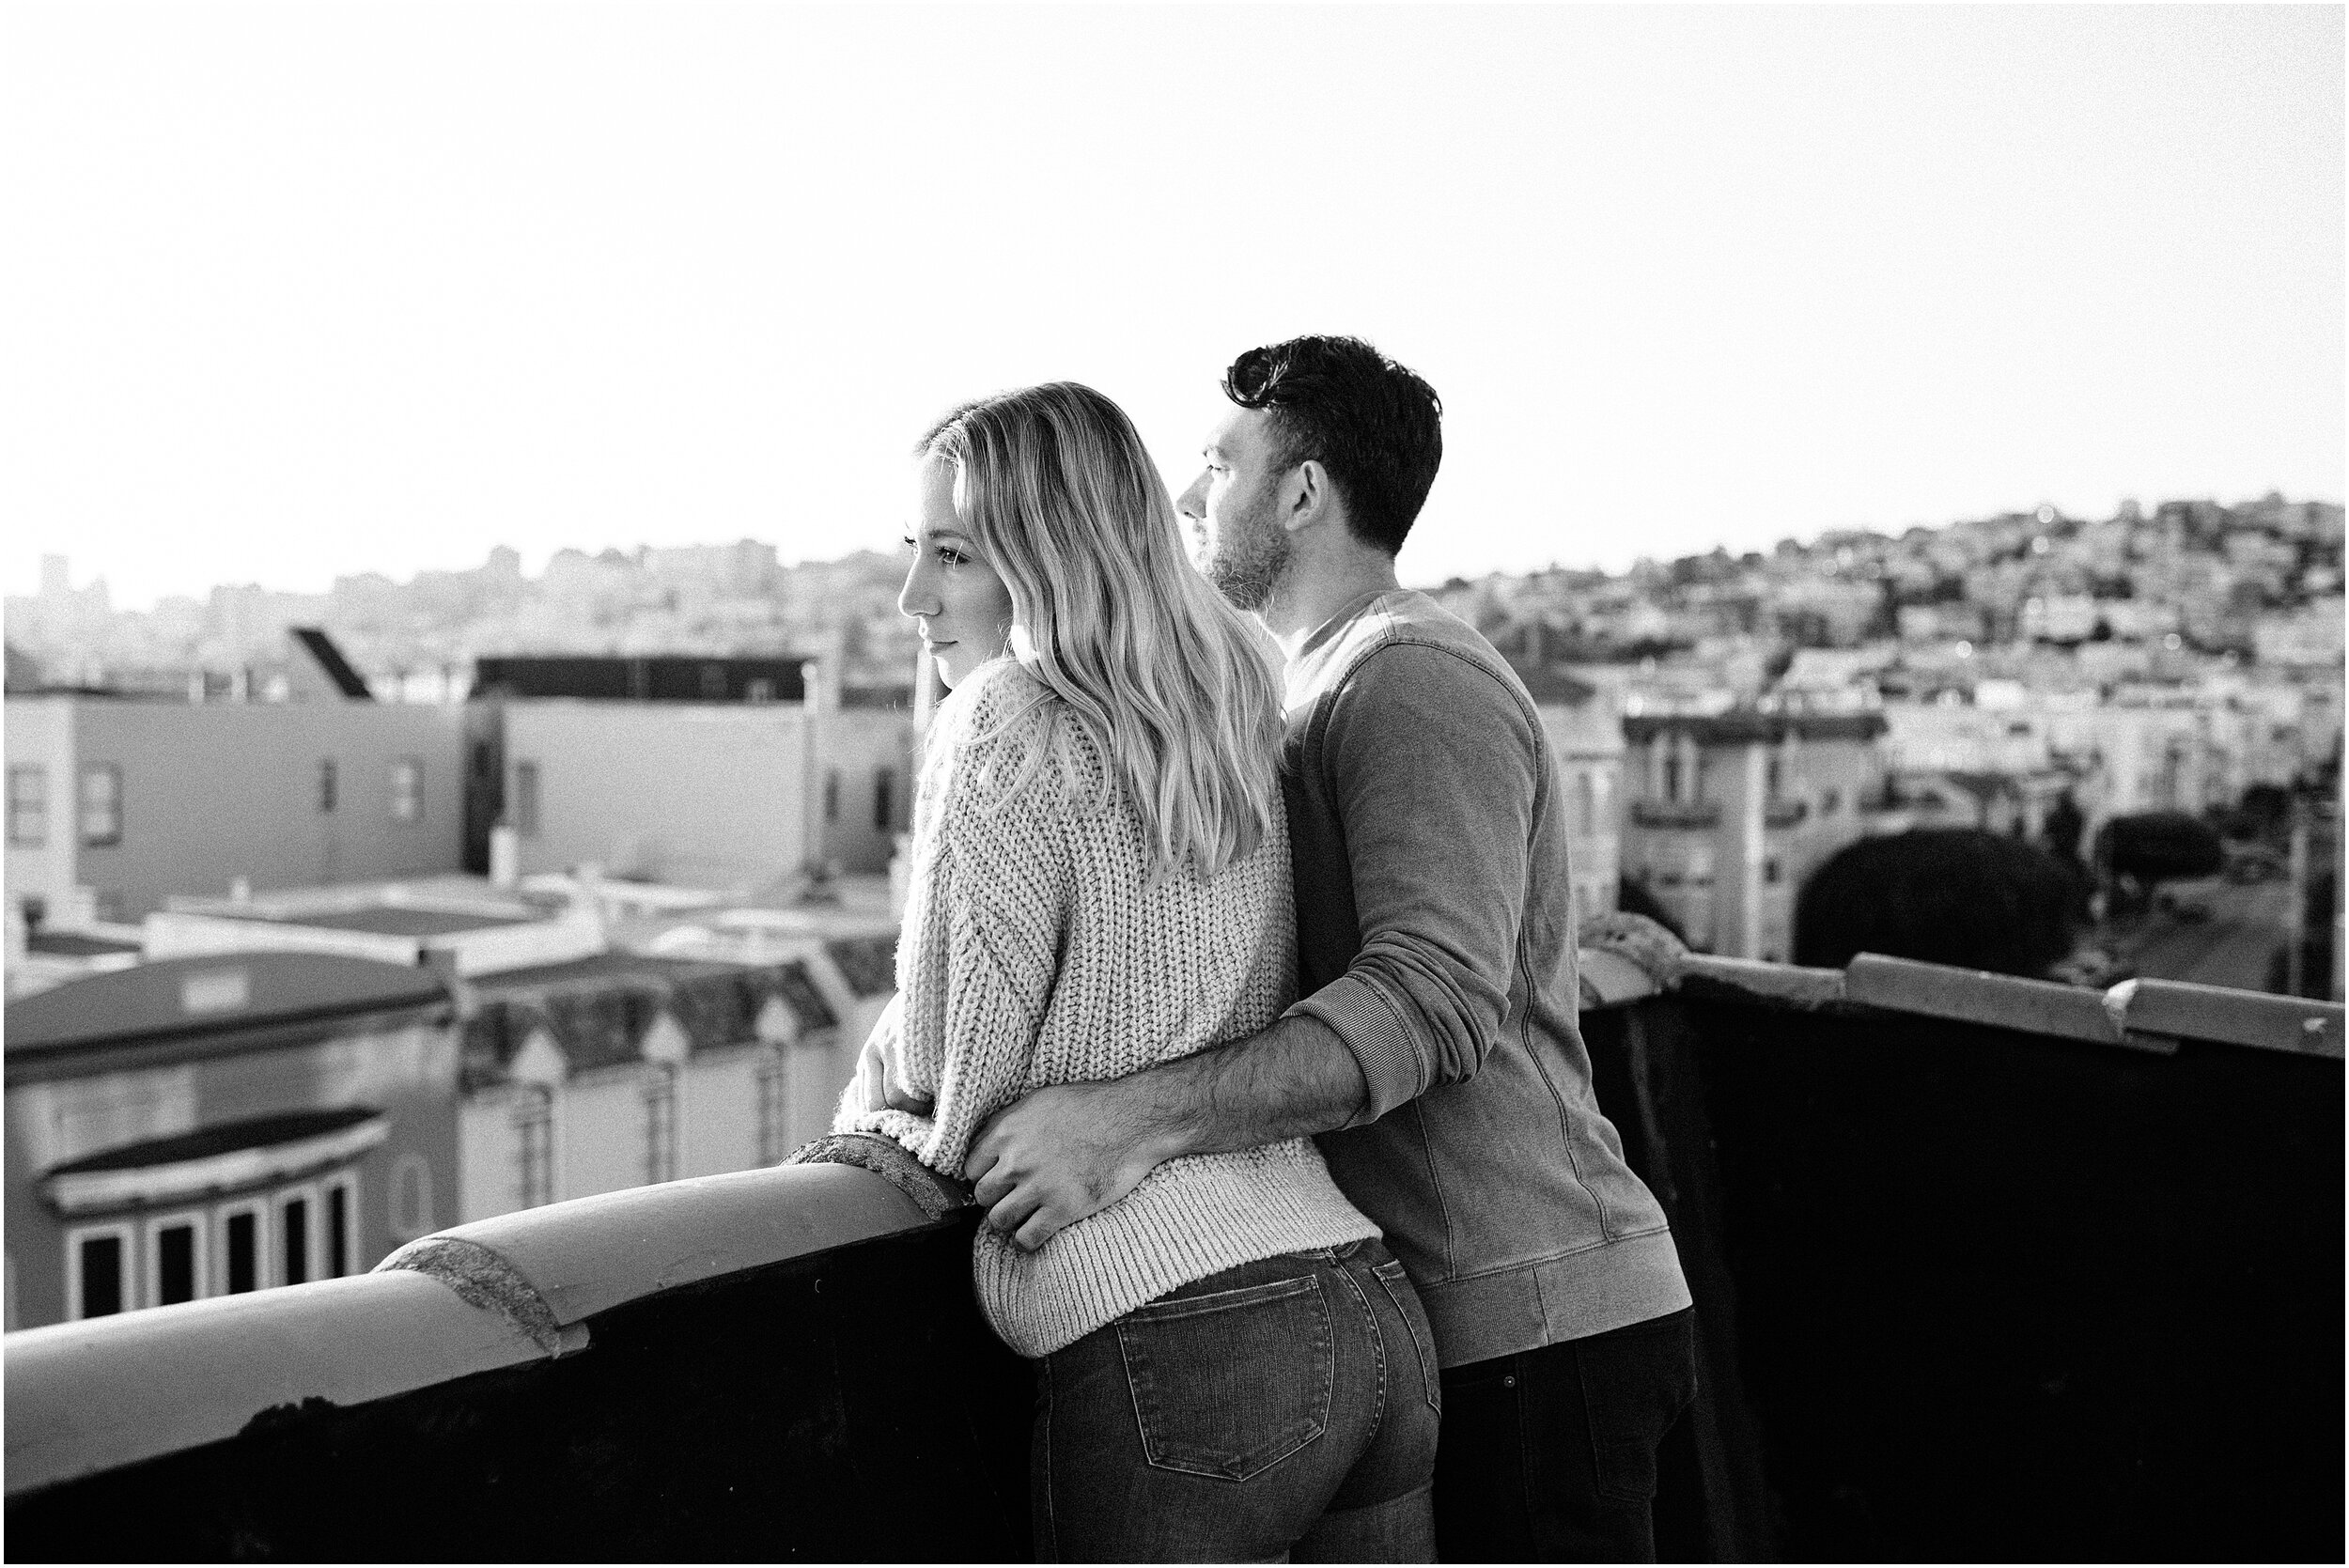 Rooftop engagement session in San Francisco, CA | Hannah Leigh Photography